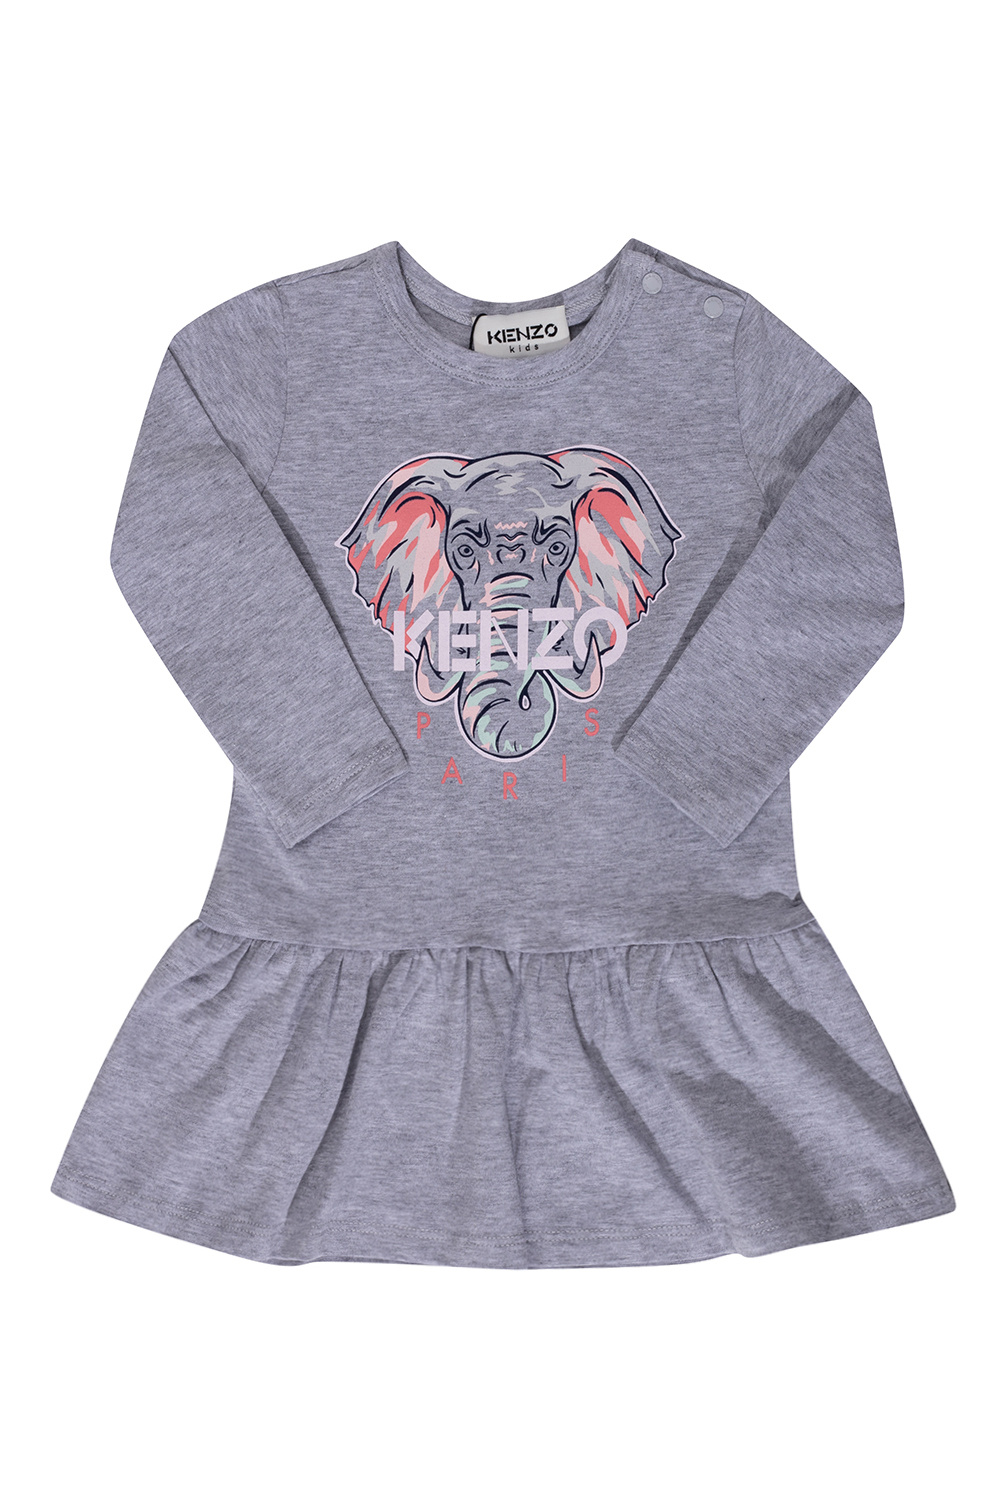 Kenzo Kids Great I wear with short socks over jeans keeps ankles warm